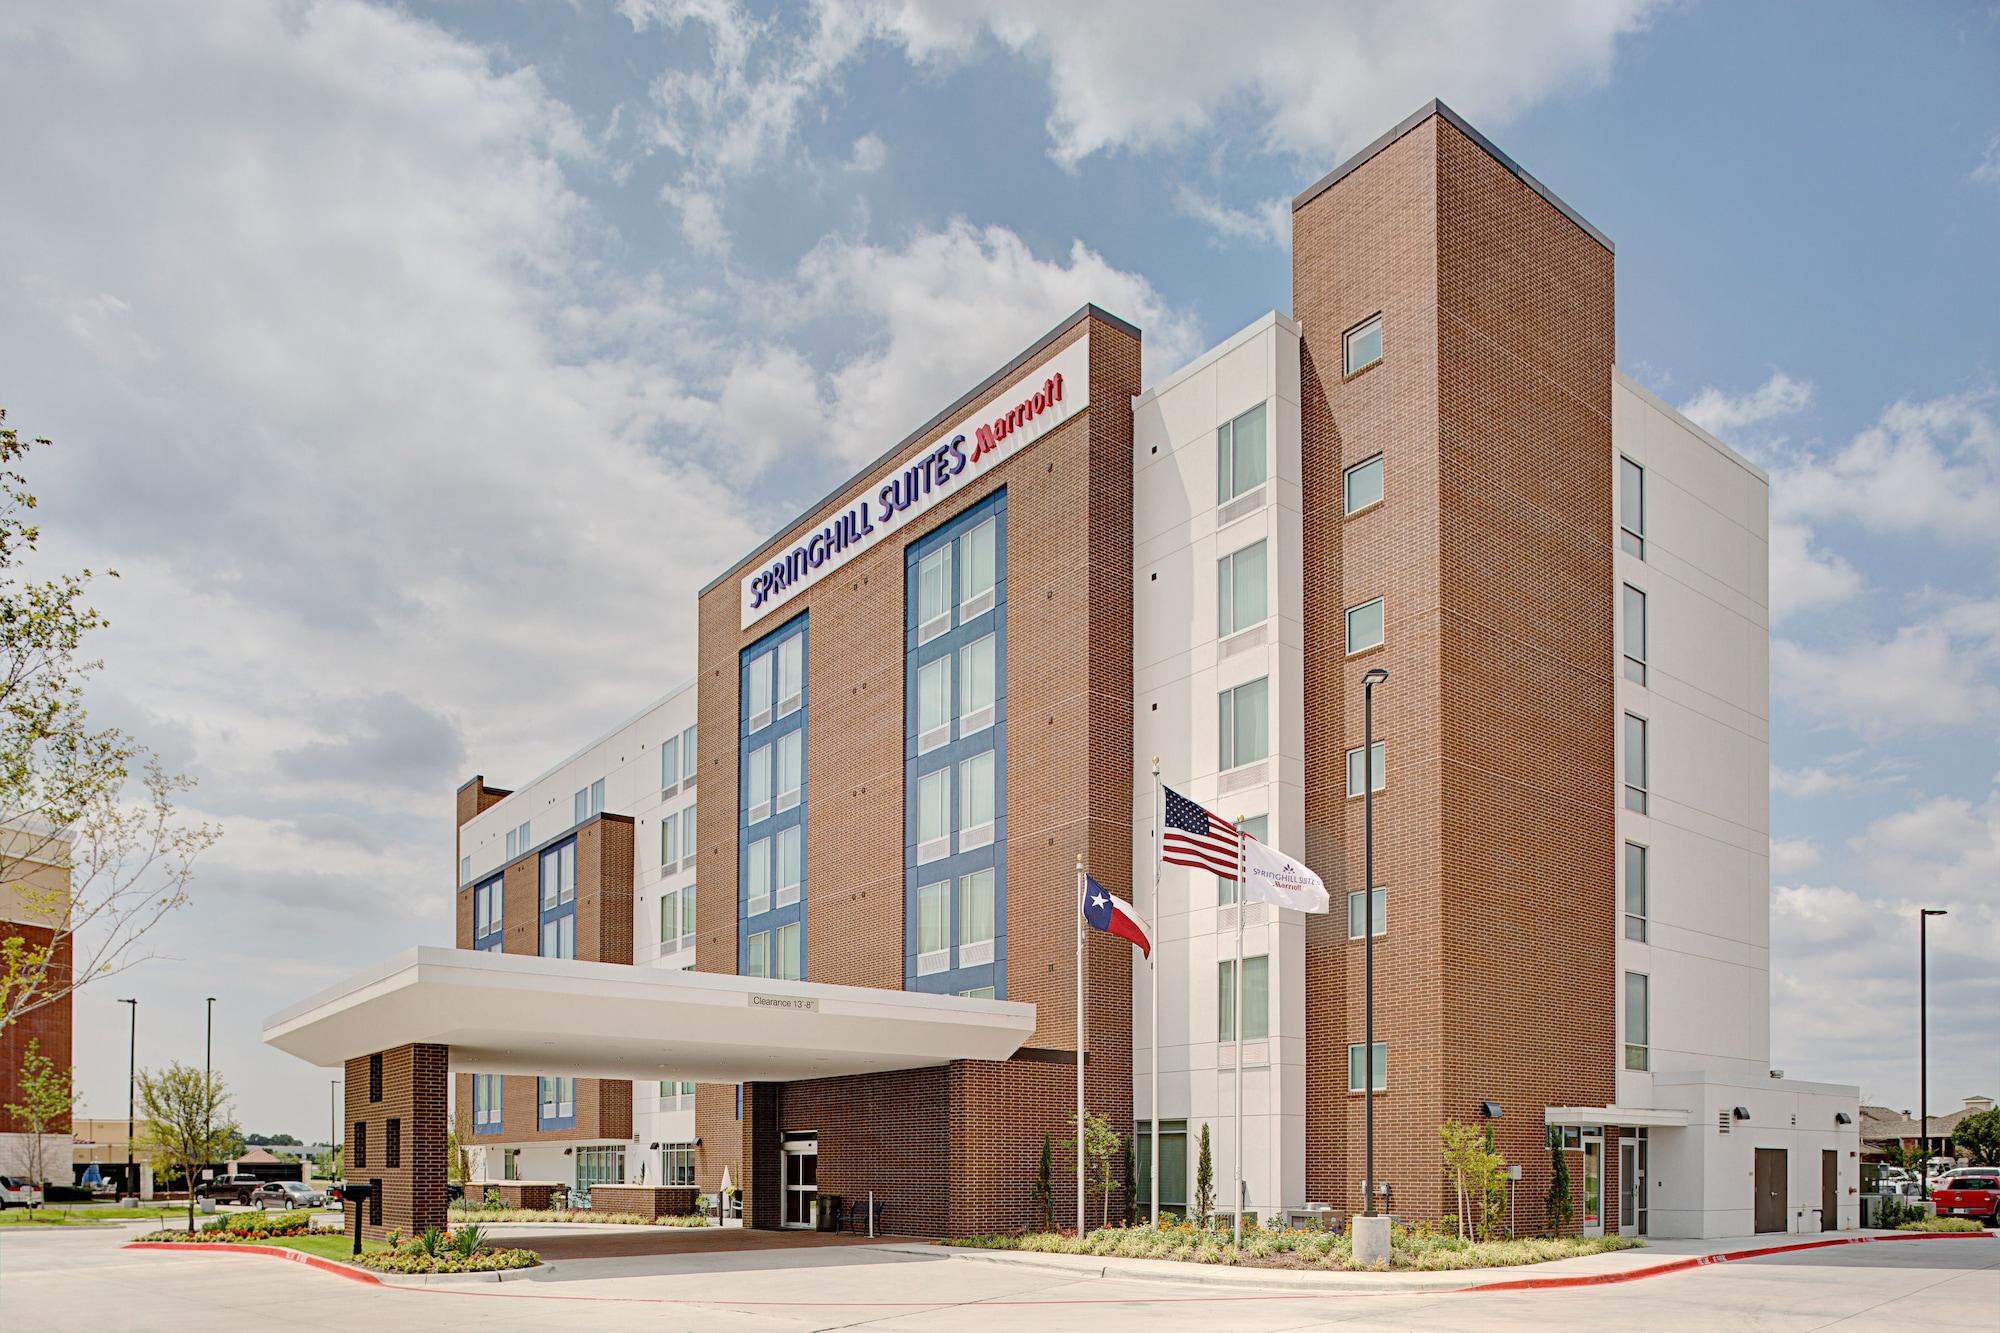 SpringHill Suites by Marriott Dallas Lewisville image